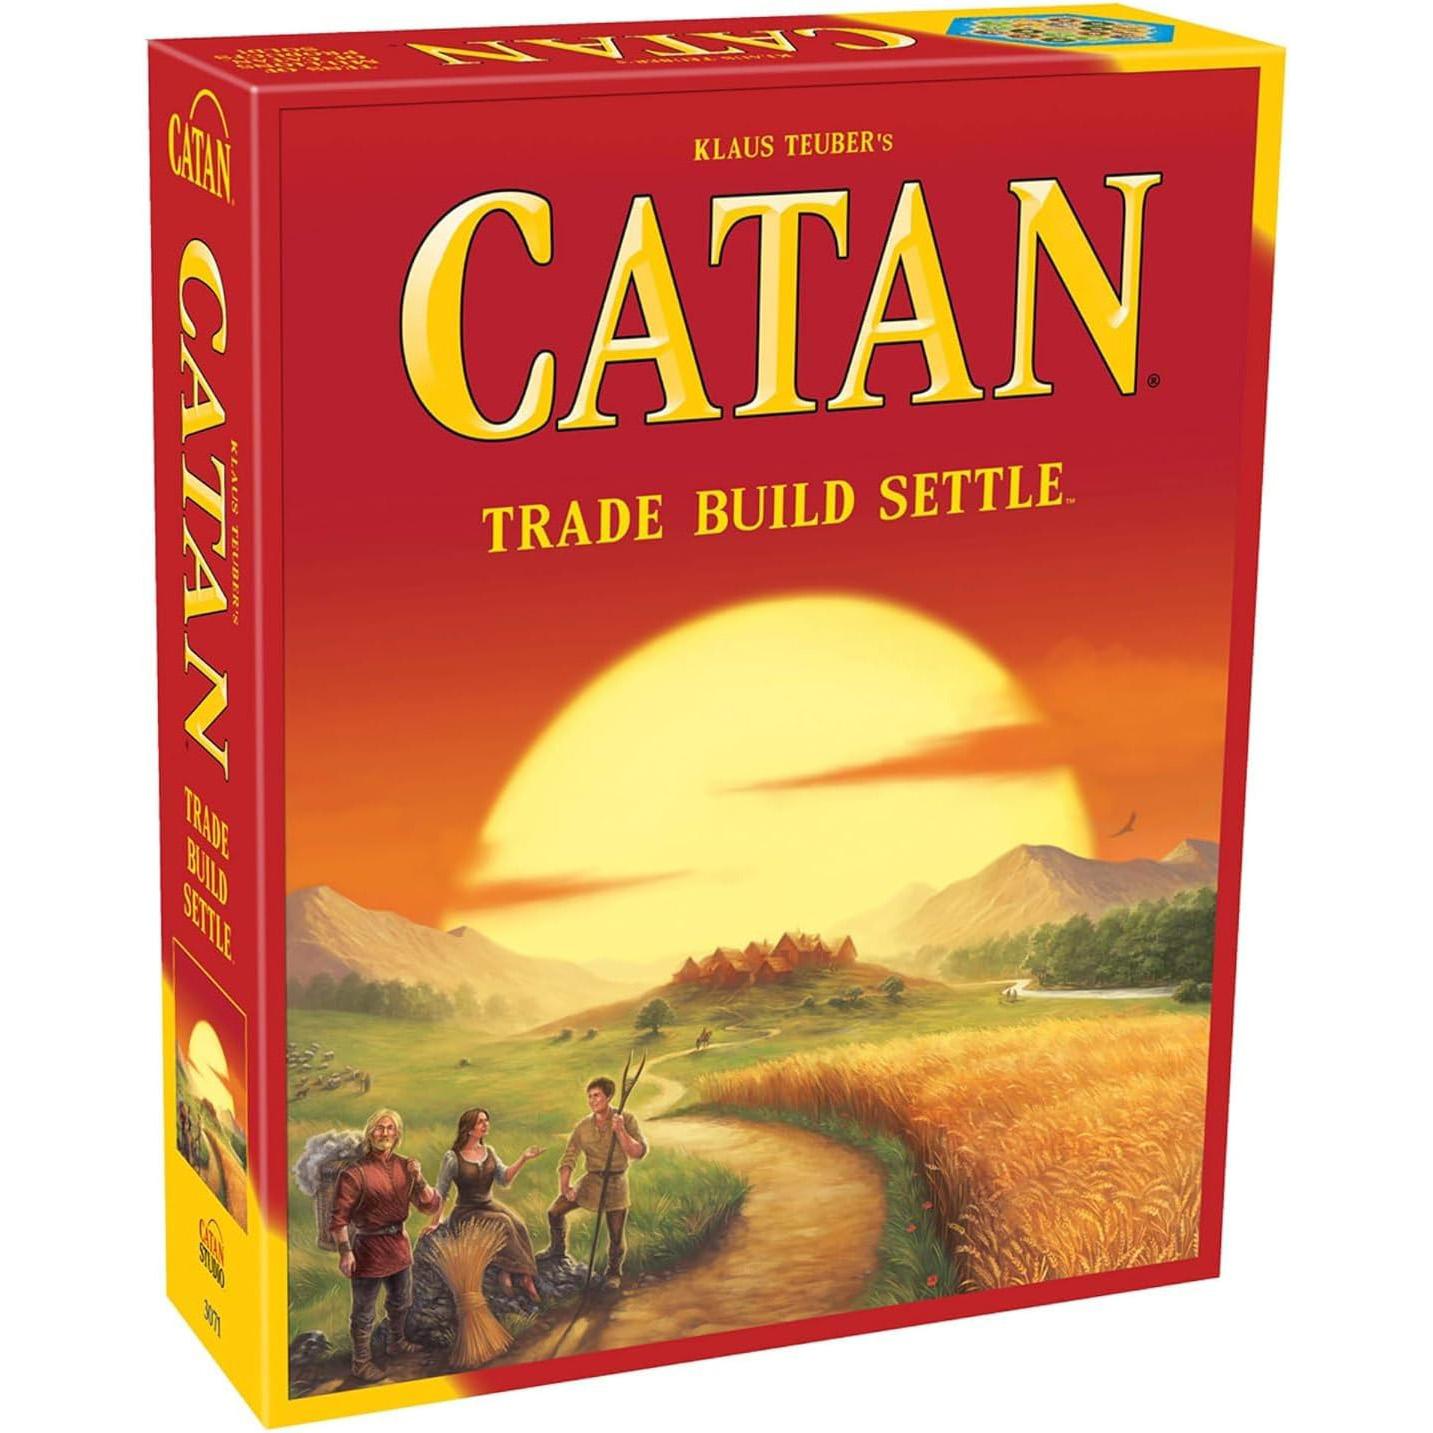 Settlers of Catan Board Game for $27.50 Shipped